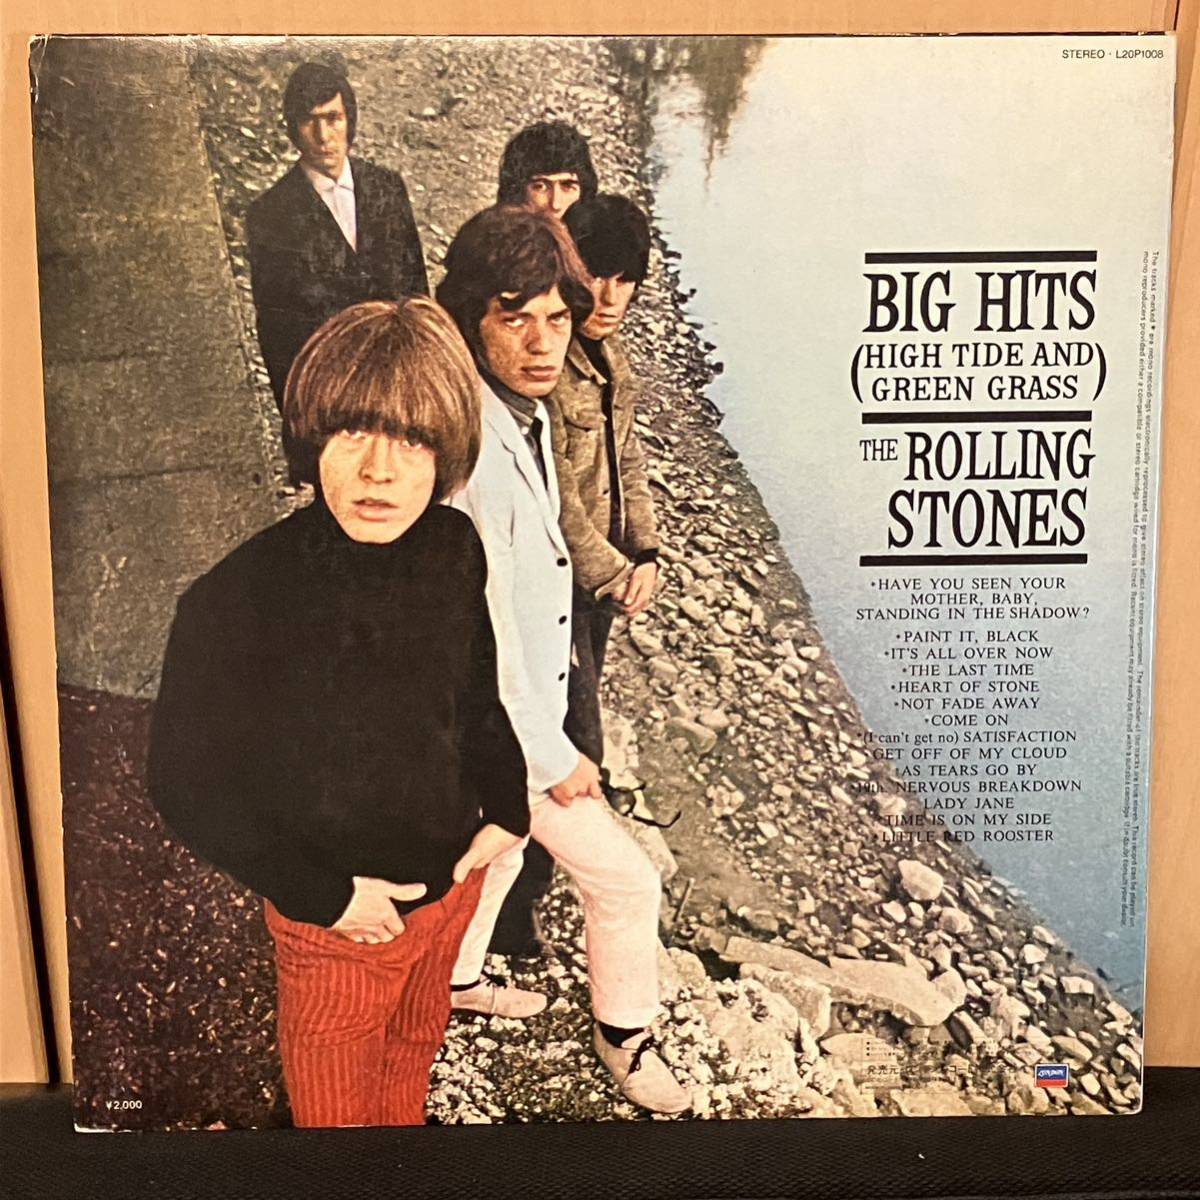 The Rolling Stones - Big Hits (High Tide And Green Grass) ローリング・ストーンズ ビッグ・ヒッツ 日本盤_画像2